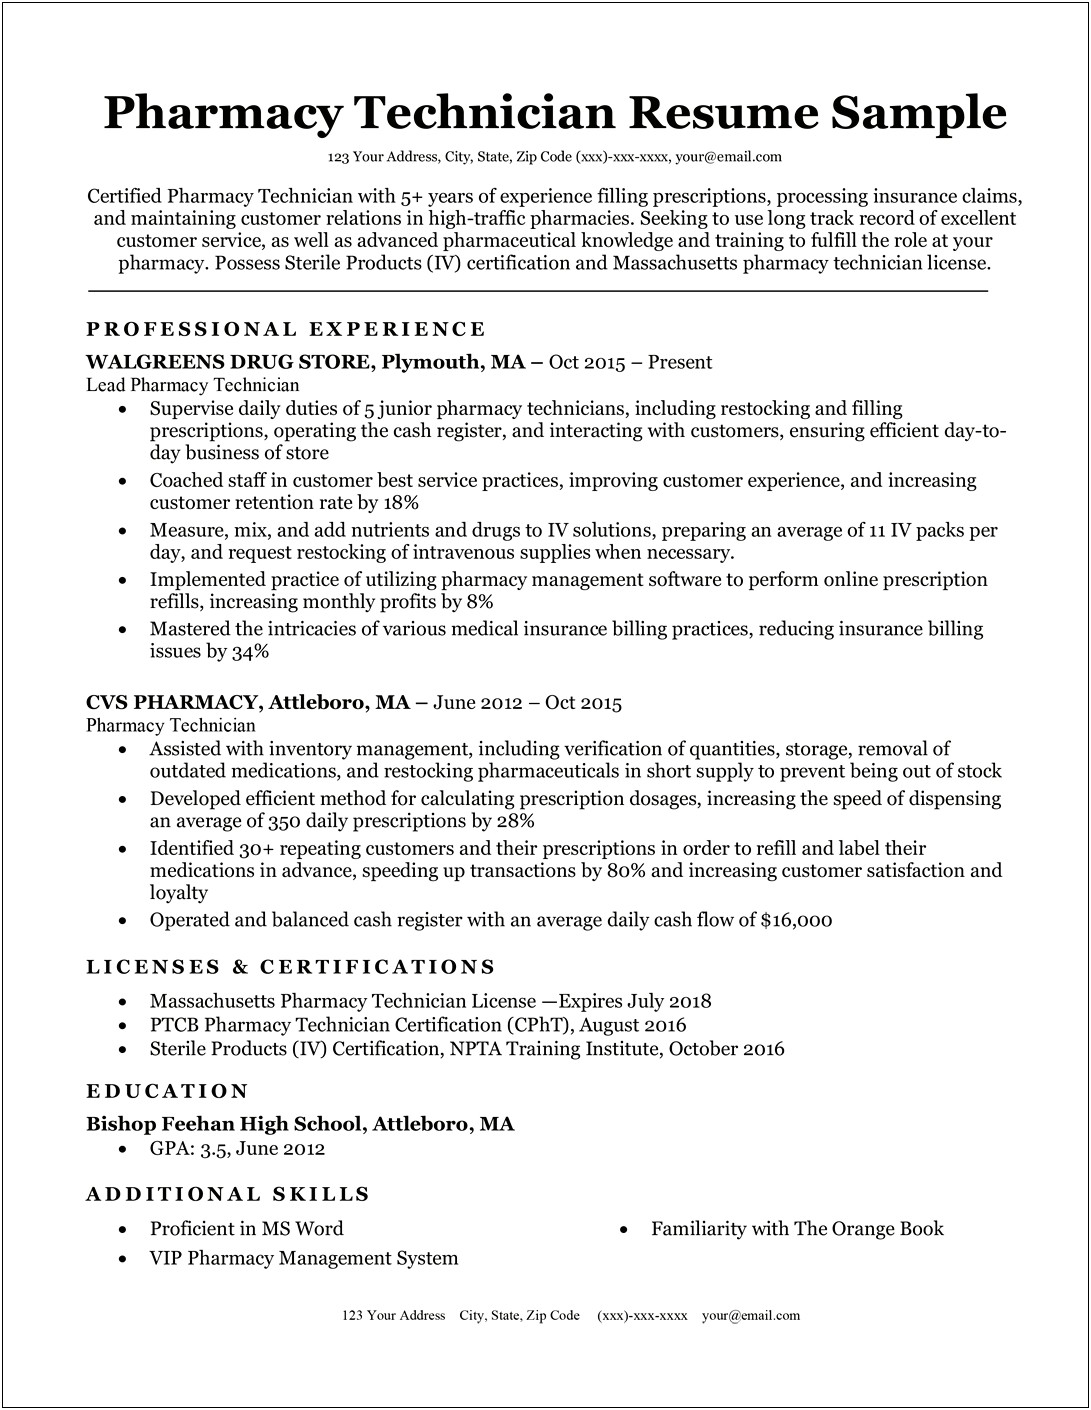 Examples Of Good Tech Resumes